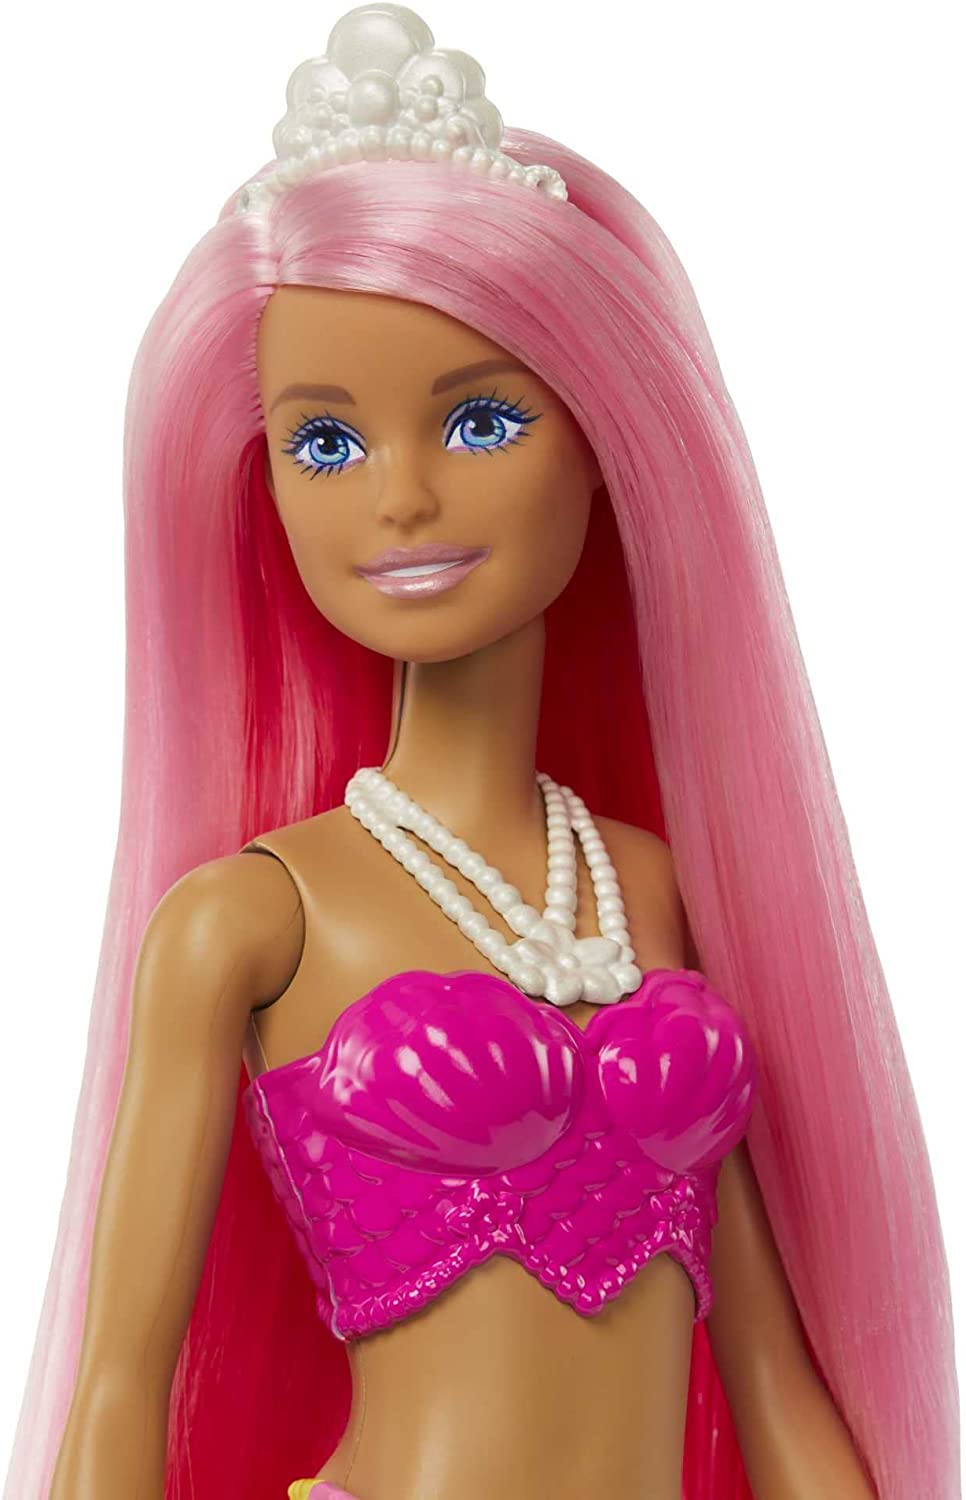 Barbie HGR11 - mermaid doll (pink with yello – Astanatrend GmbH